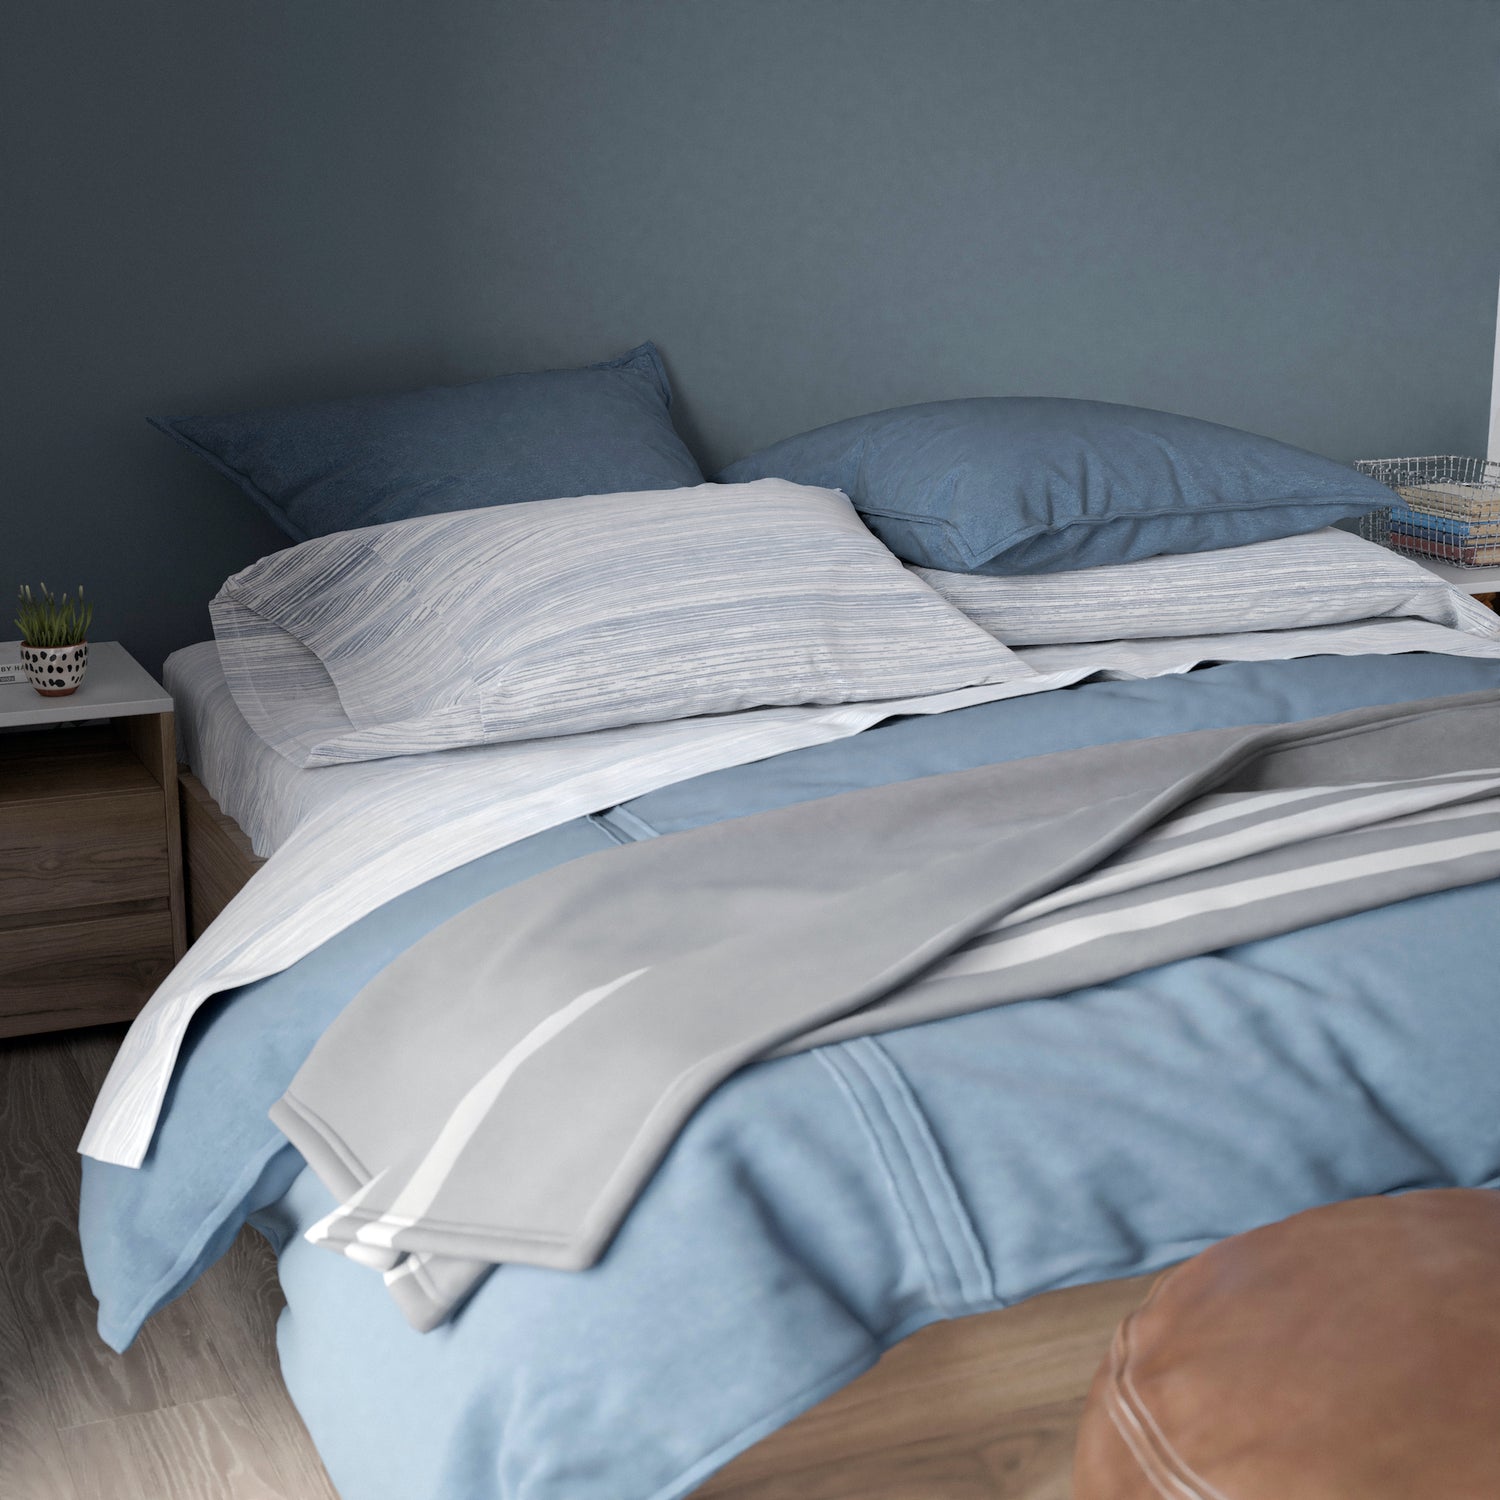 To Top Sheet or Not To Top Sheet: Pros & Cons of Top Sheets